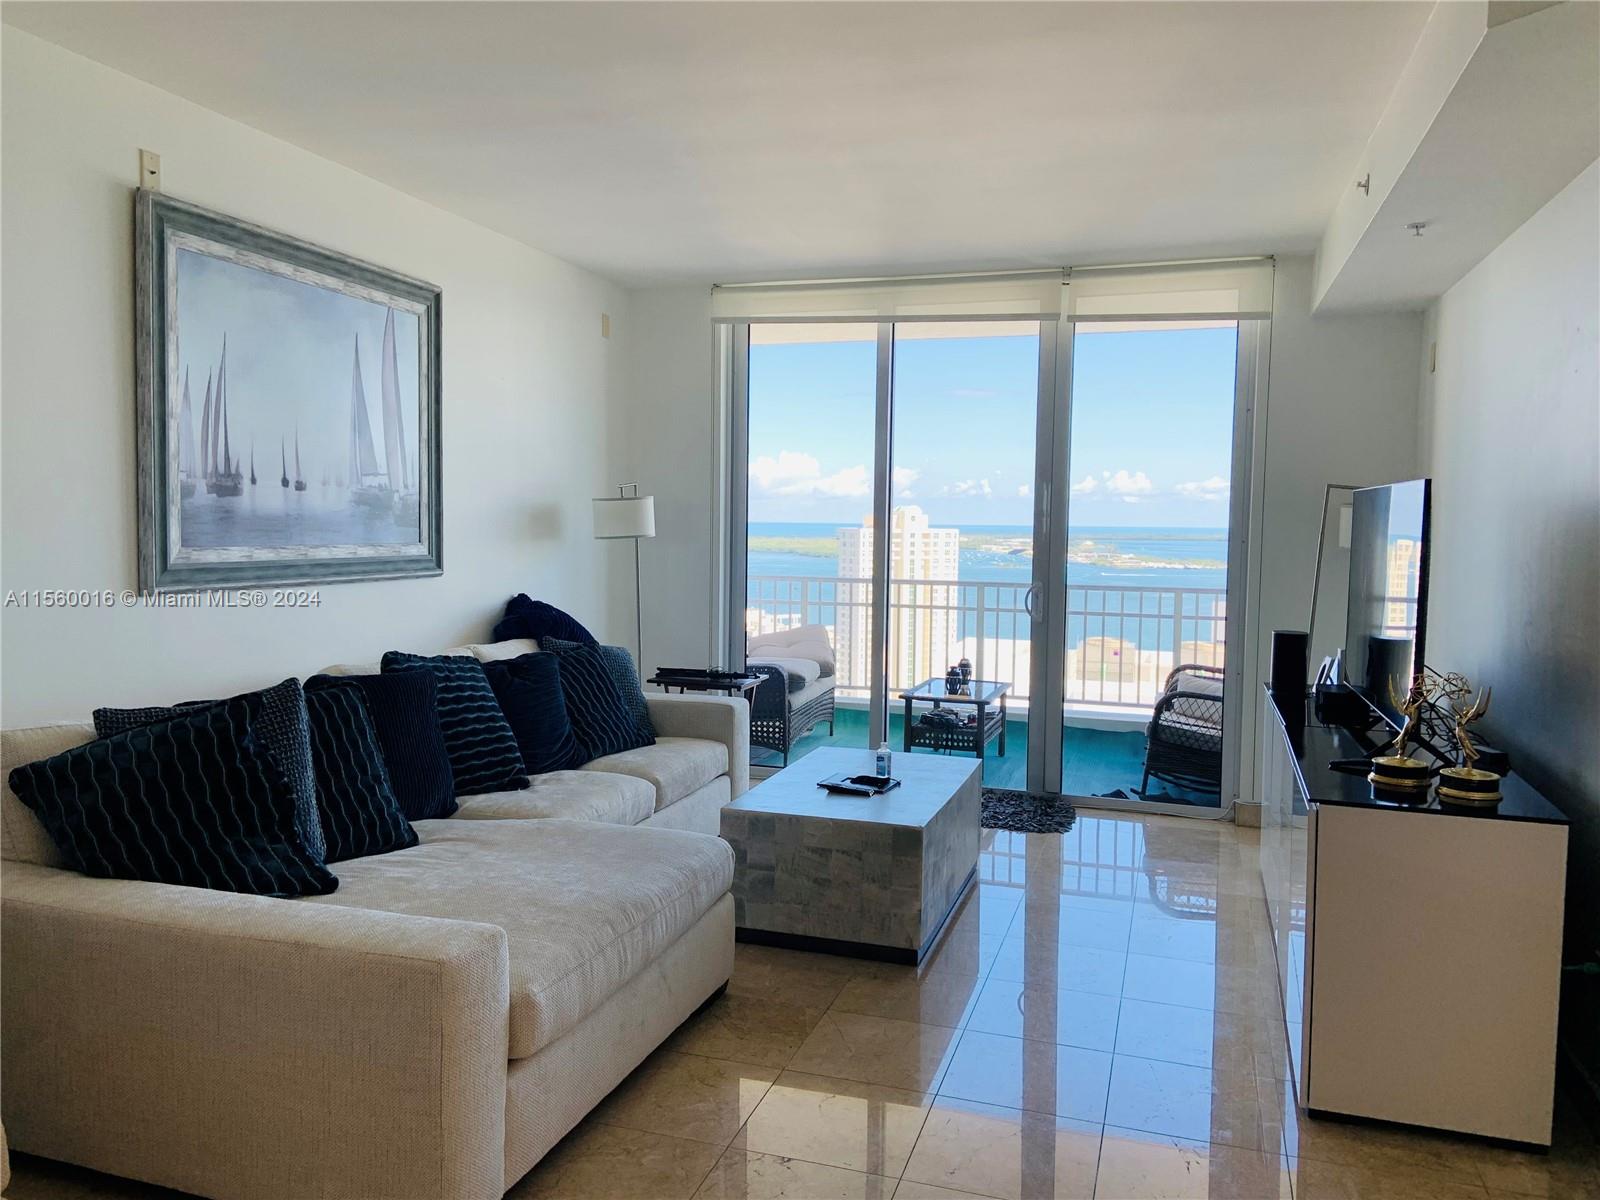 Unobstructed views of bay and skyline from this high floor residence in prestigious Brickell Key Island. The property features high ceilings, marble floors in living areas, carpet in bedroom, lots of natural light, open kitchen with granite countertops. Courts Brickell Key is a full service building, meticulously maintained  with well equipped gym, racquetball and squash courts, inviting pool area by the bay, hot tub, 24 hrs lobby concierge, complimentary valet parking for your guests and professional management on site. Assigned and covered parking space included. Must see to appreciate.